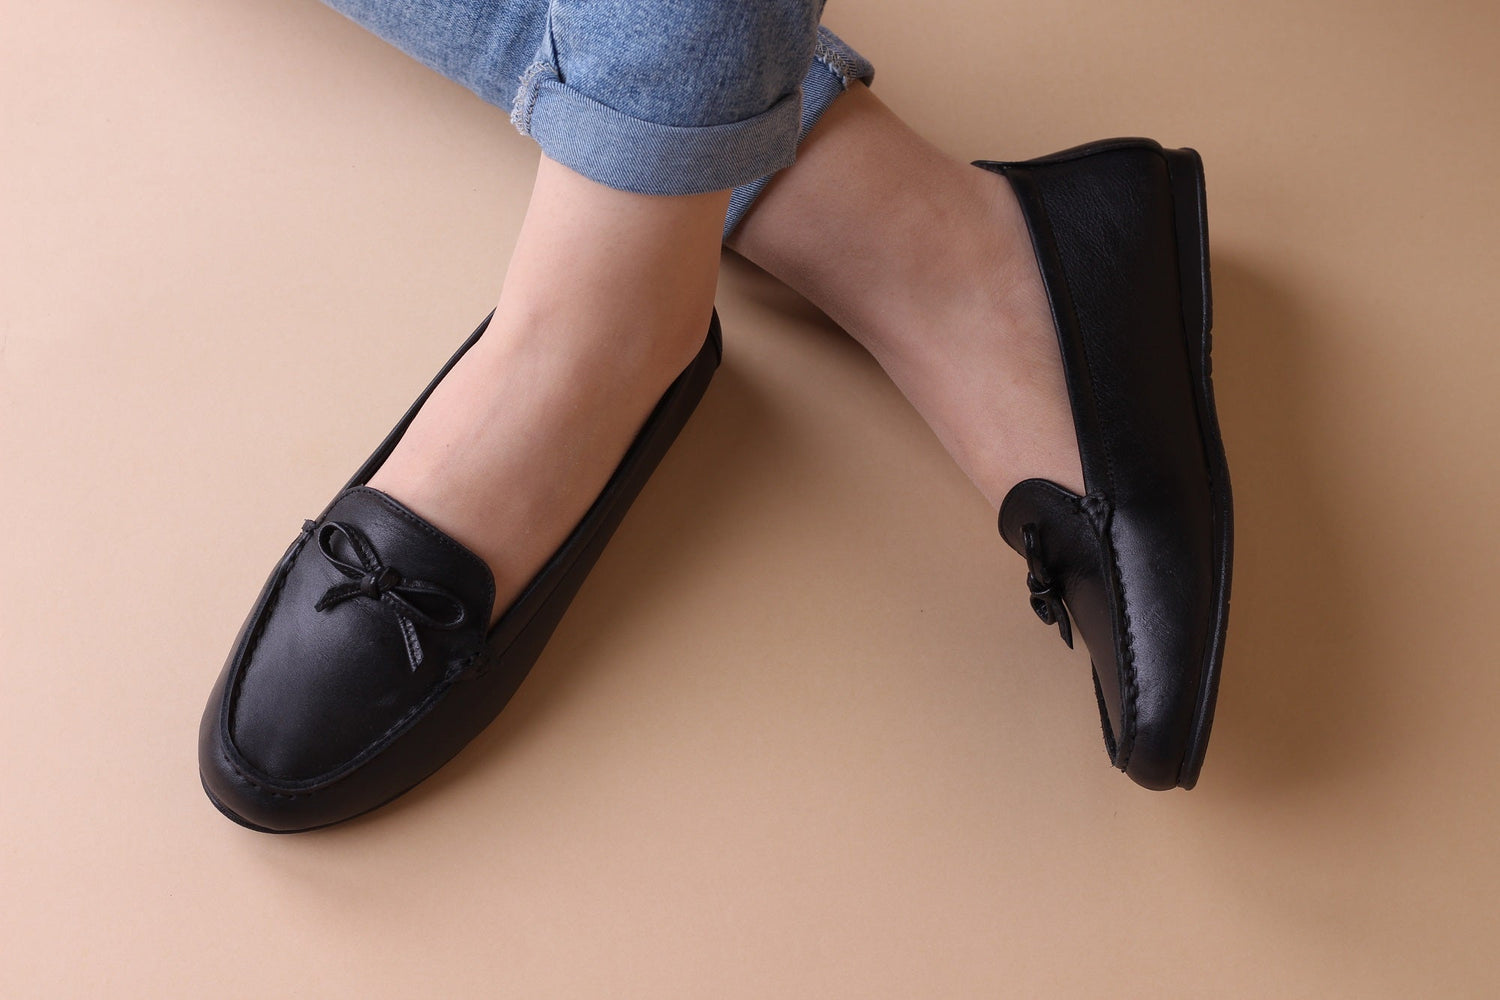 Black women's genuine leather shoes with a simple front bow